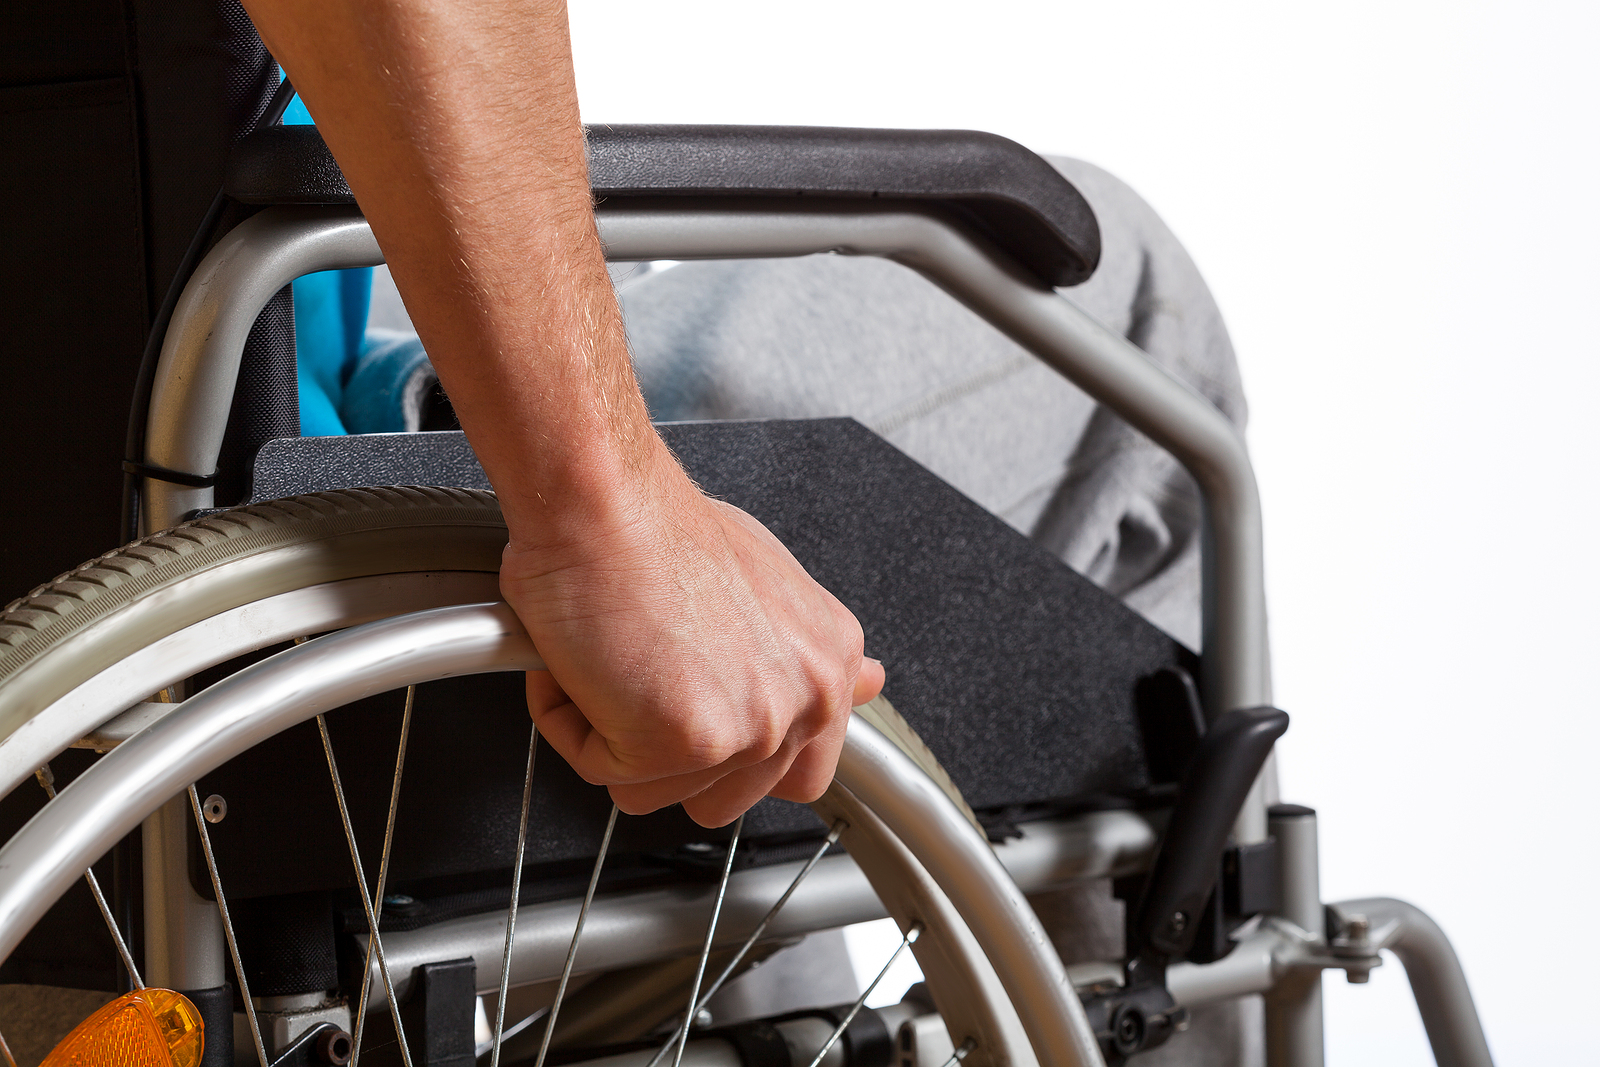 5 Tips for Finding the Right Wheelchair